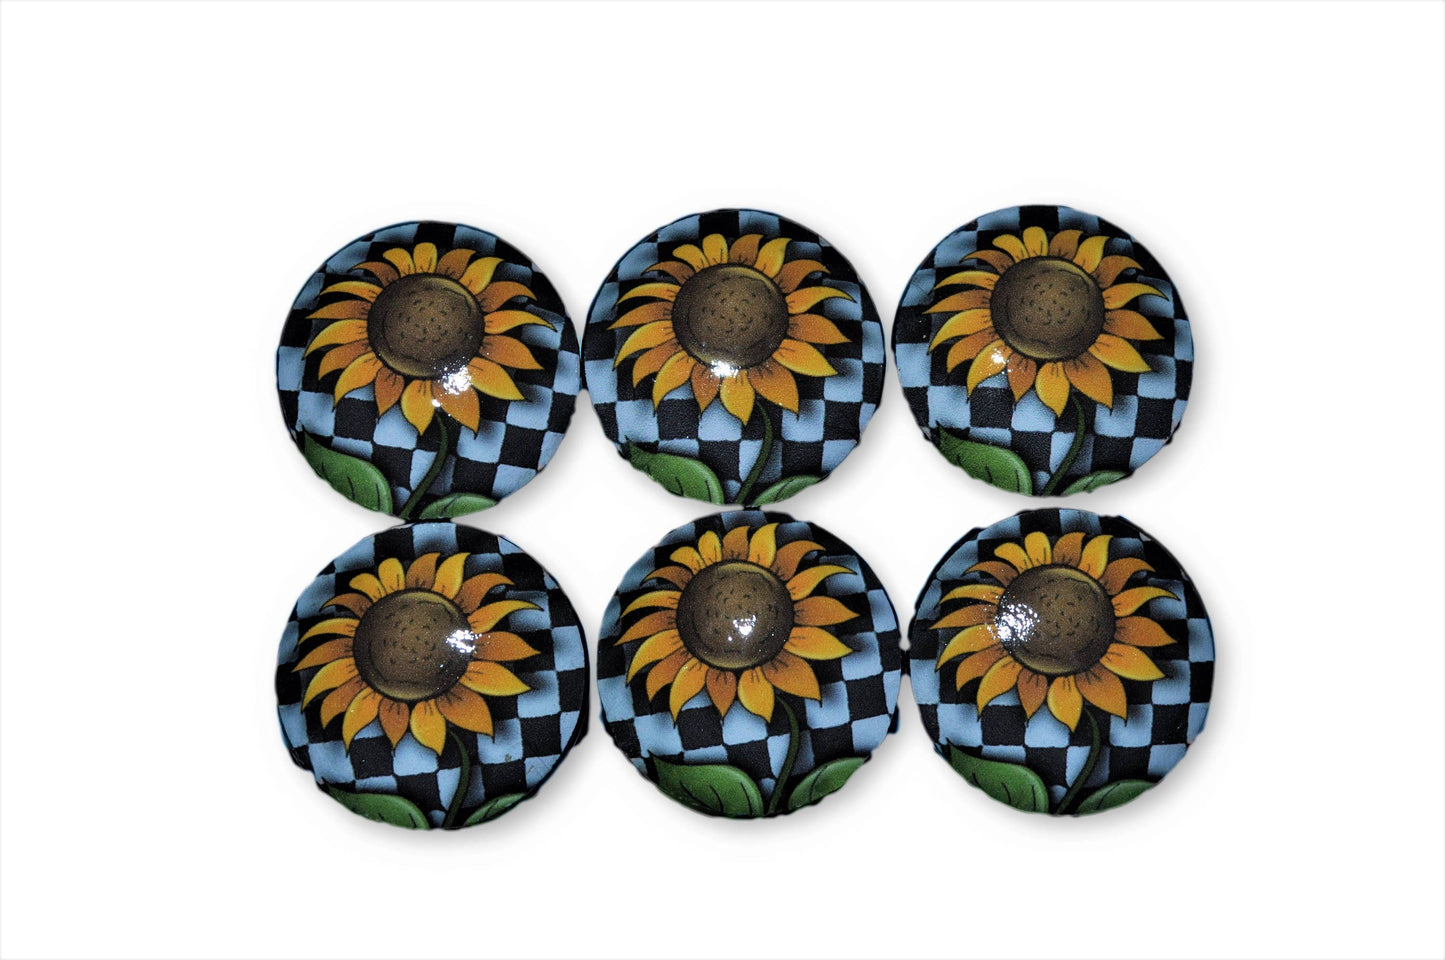 Set of 6 Black and White Check Sunflowers Cabinet Knobs